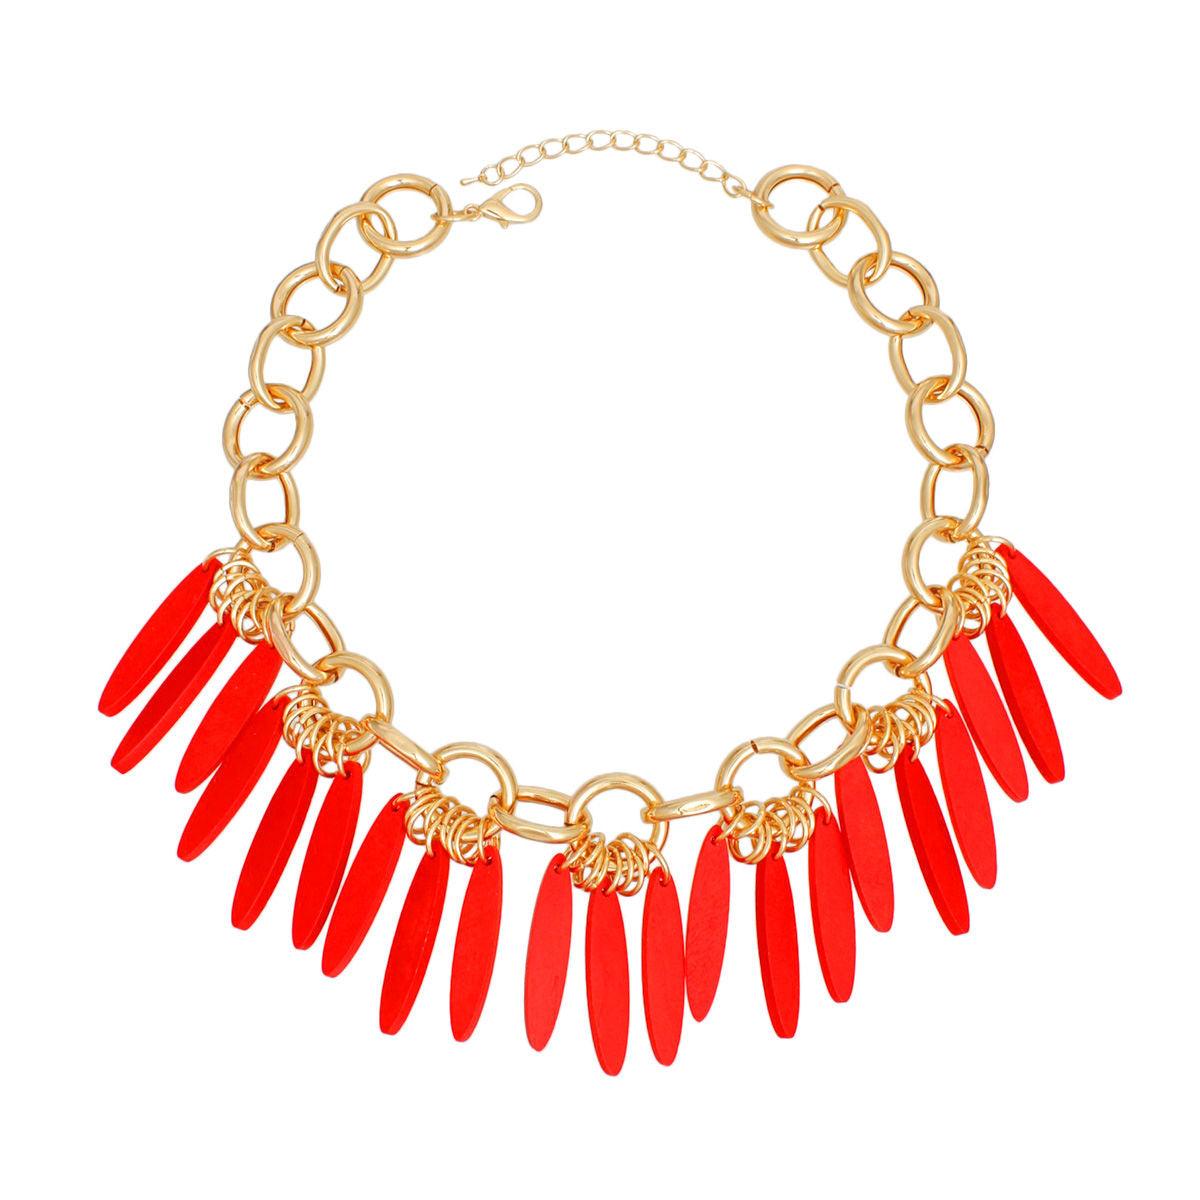 Gold Link Chain Red Drops Detail Statement Necklace - Fashion Jewelry to Shop Now!